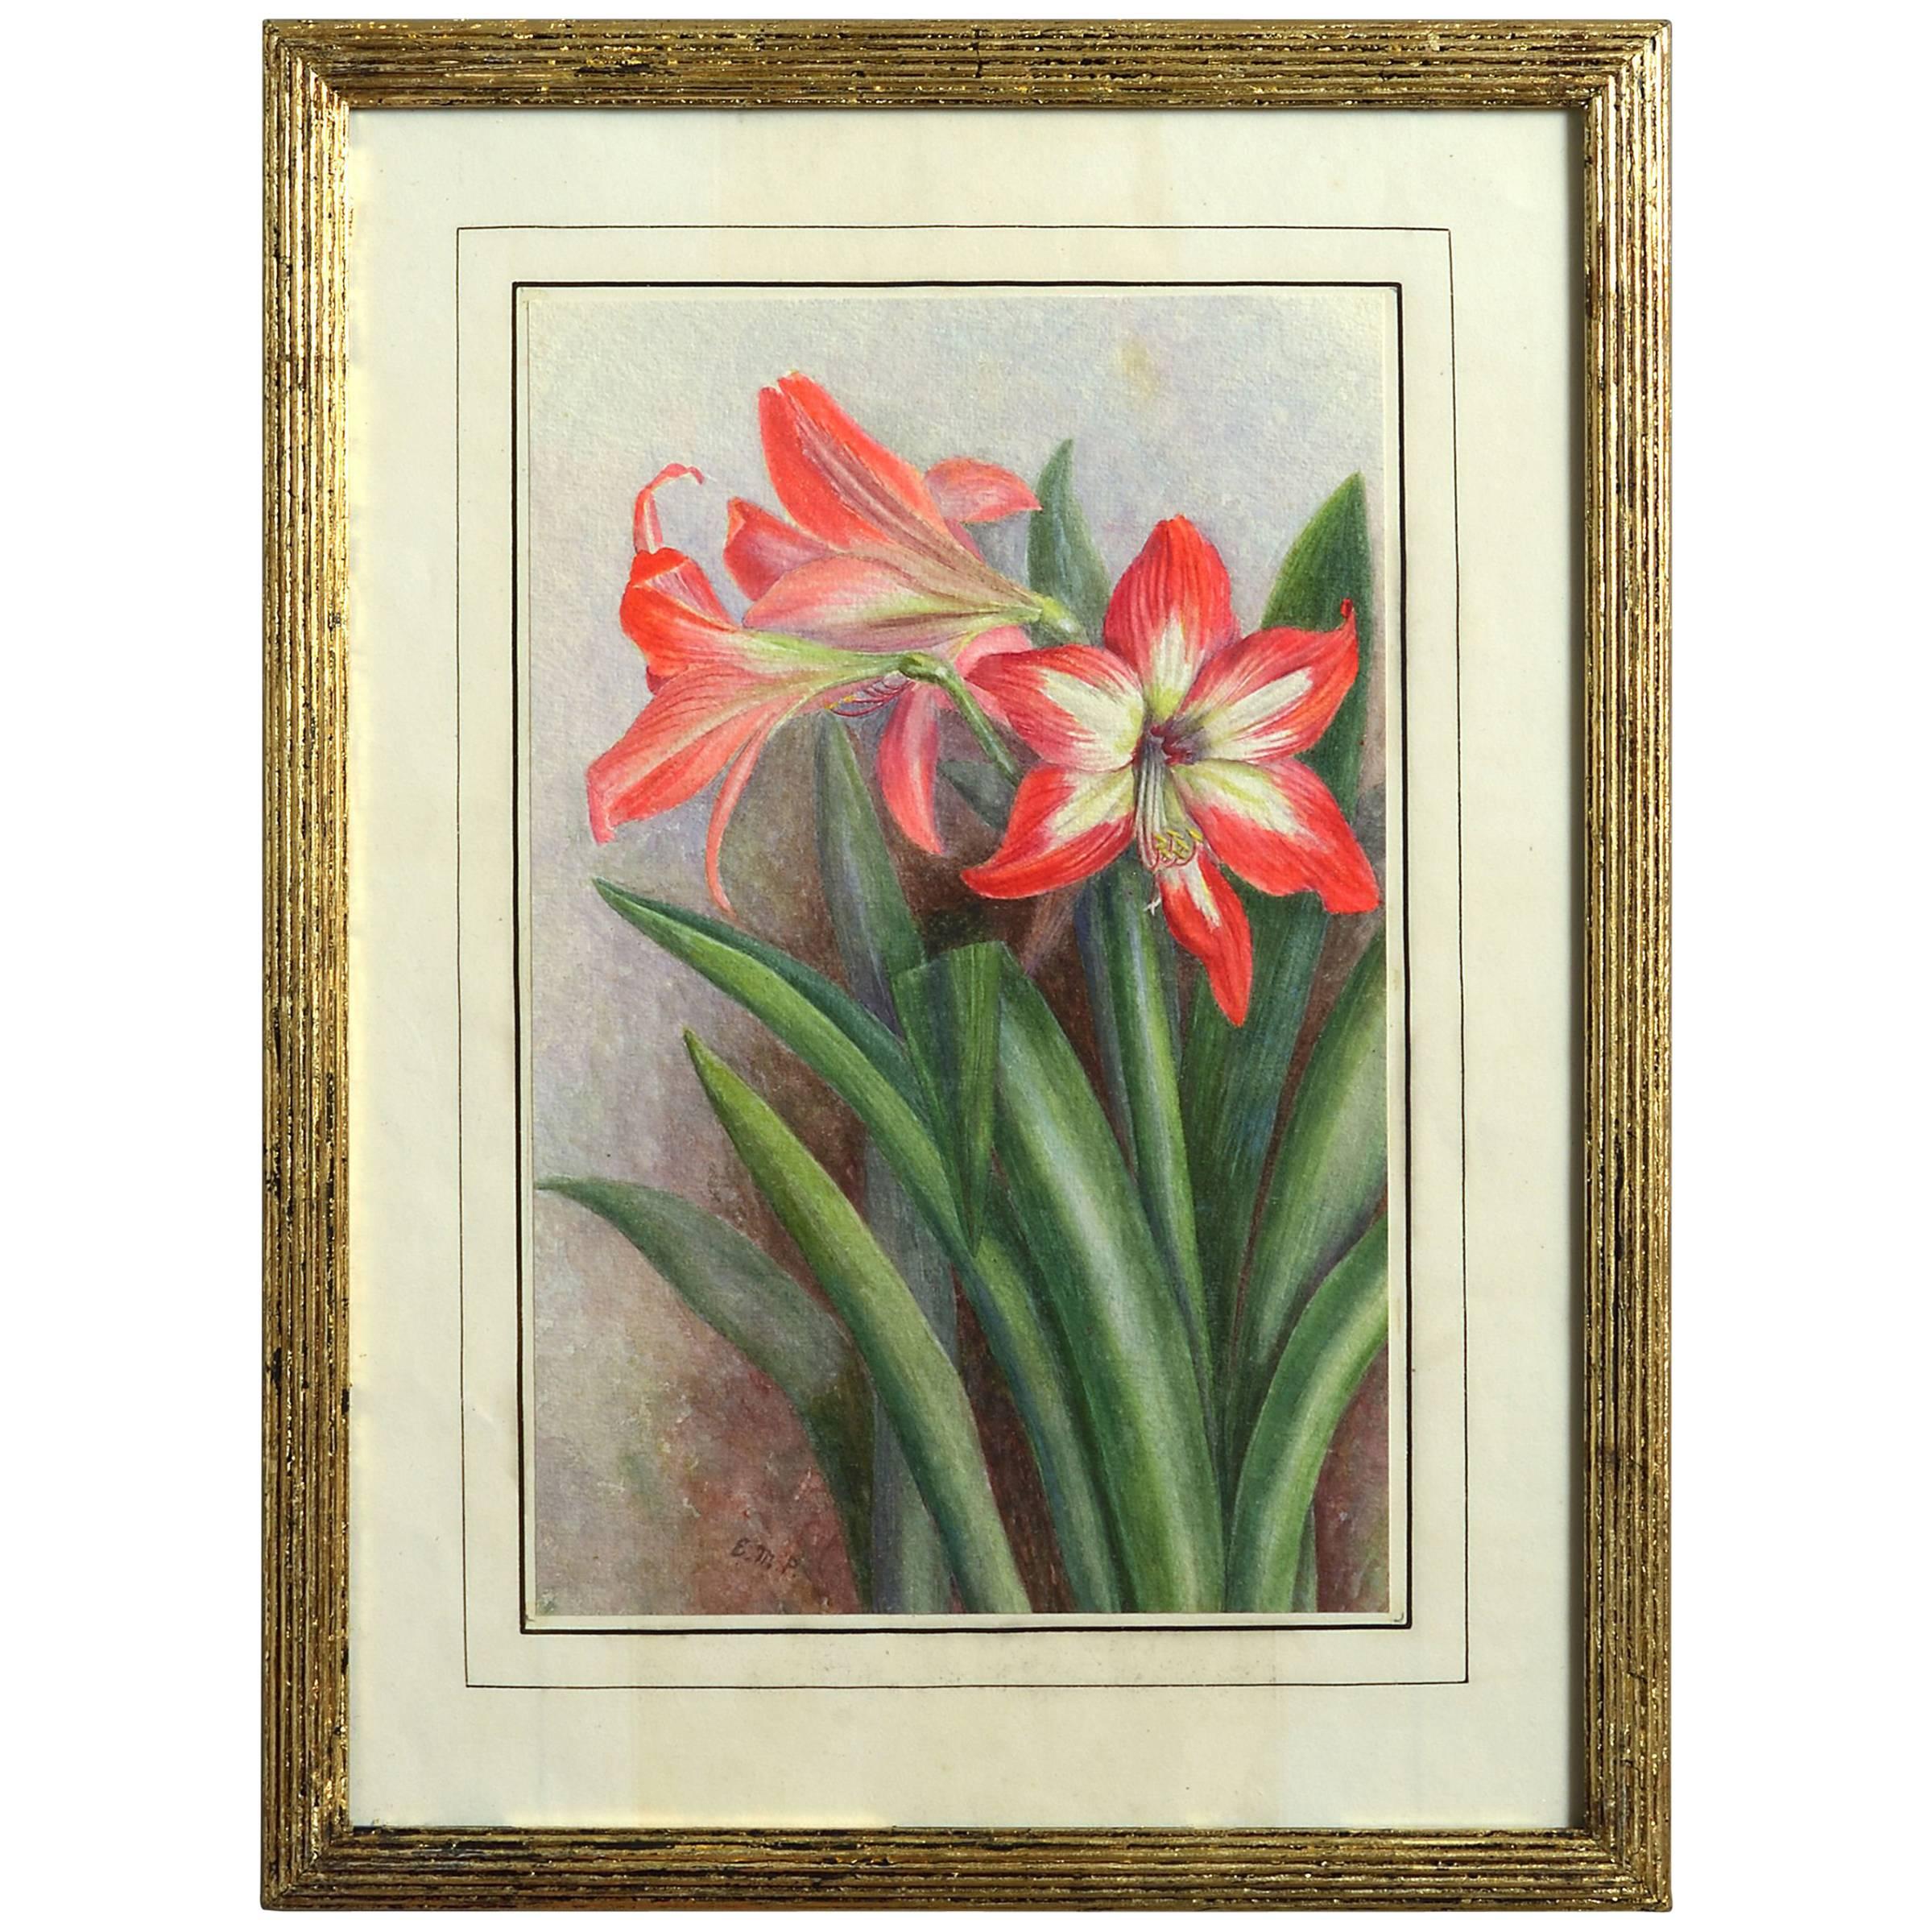 Late 19th Century Botanical Watercolor Depicting Red Lilies